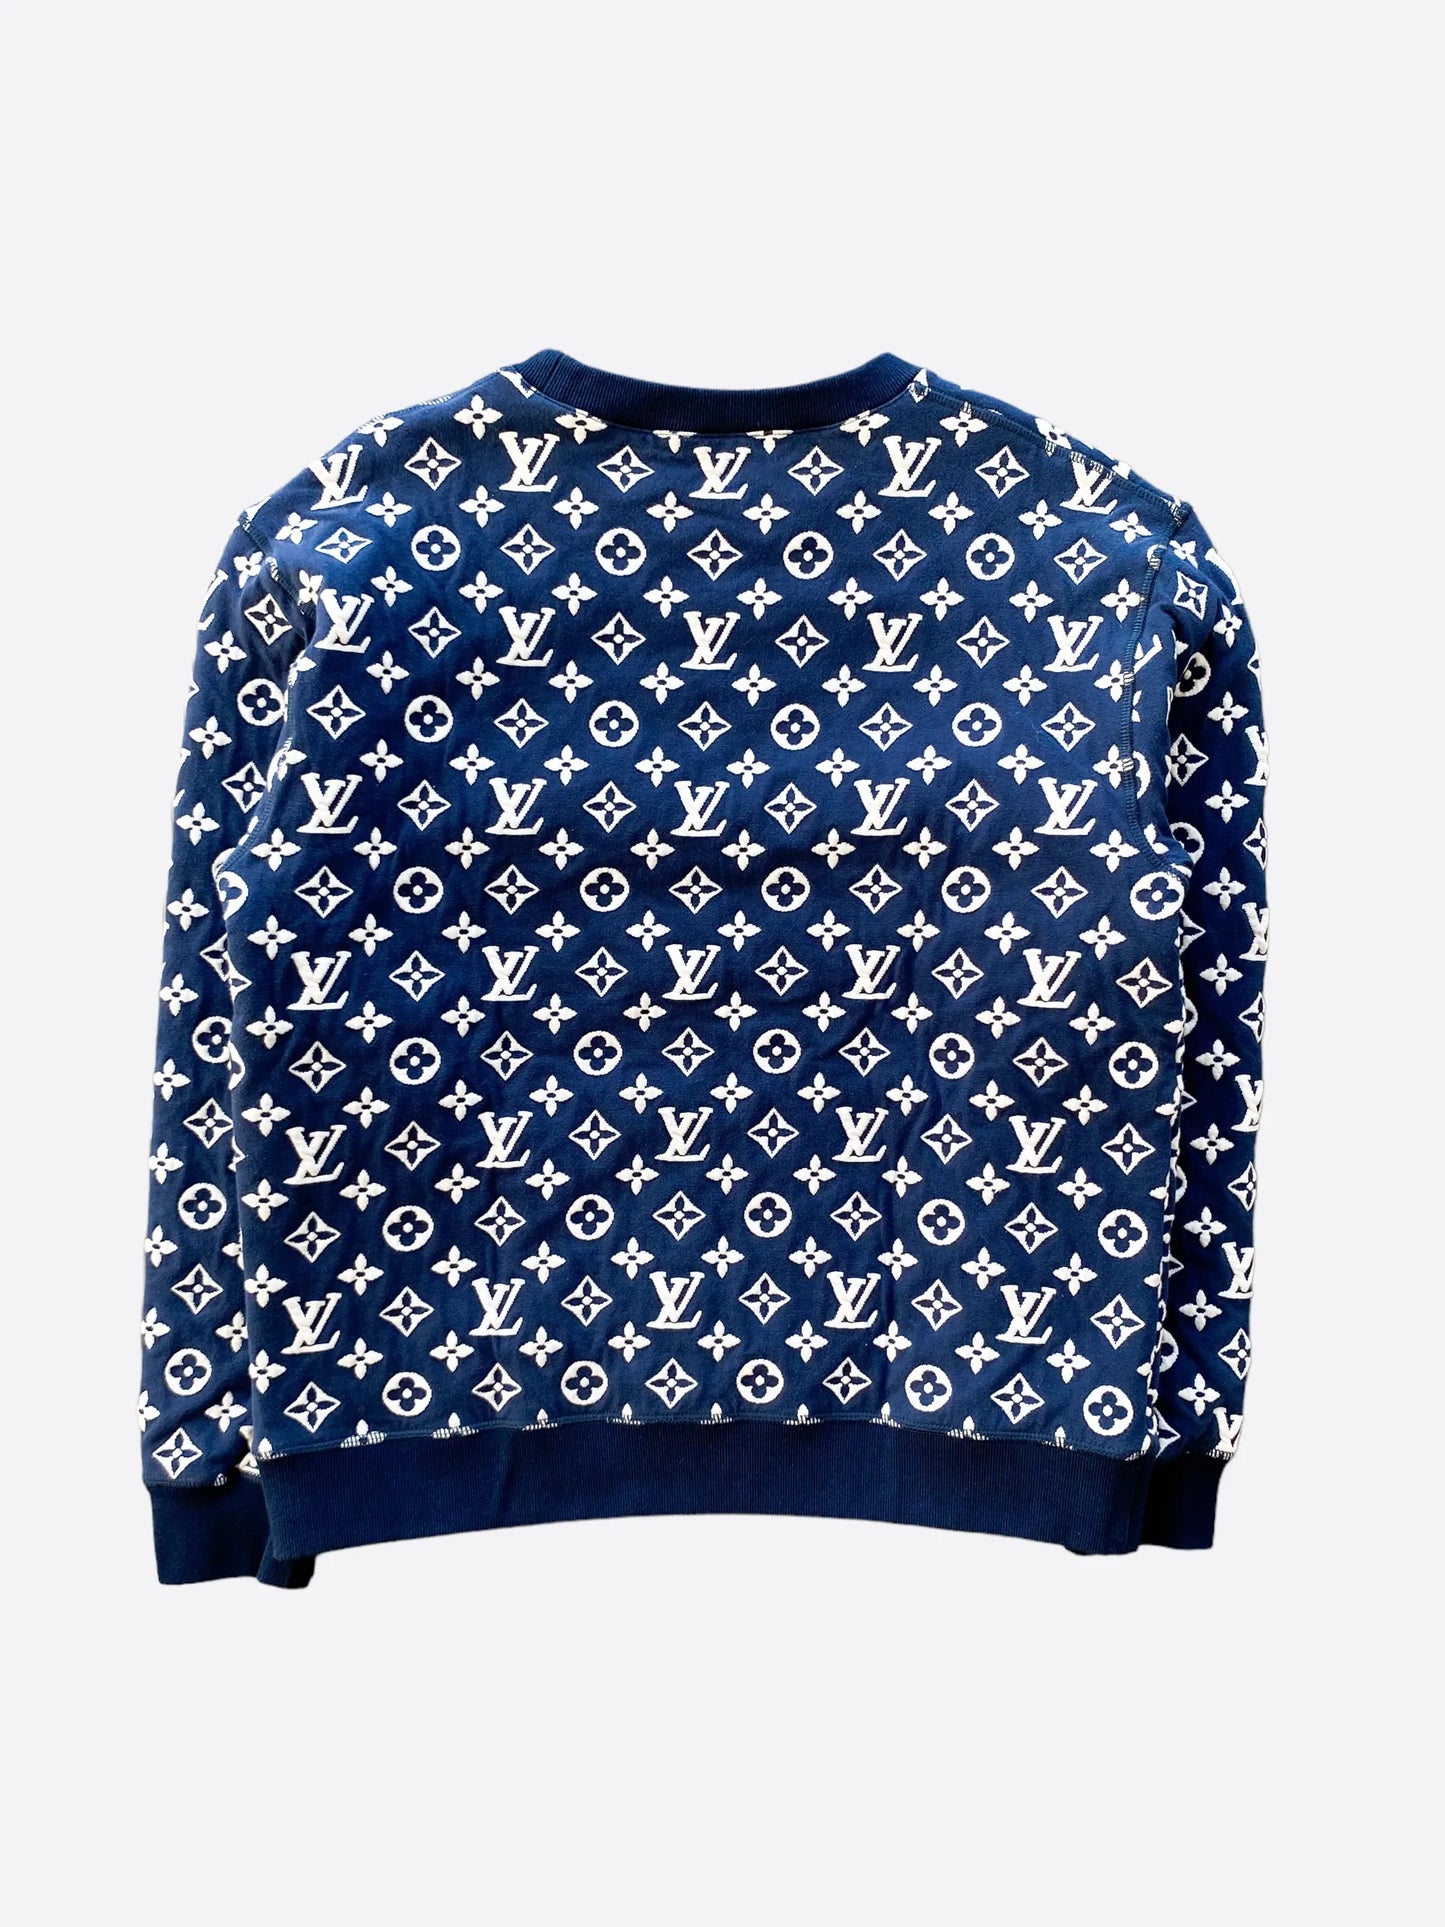 louis vuitton blue and white sweater